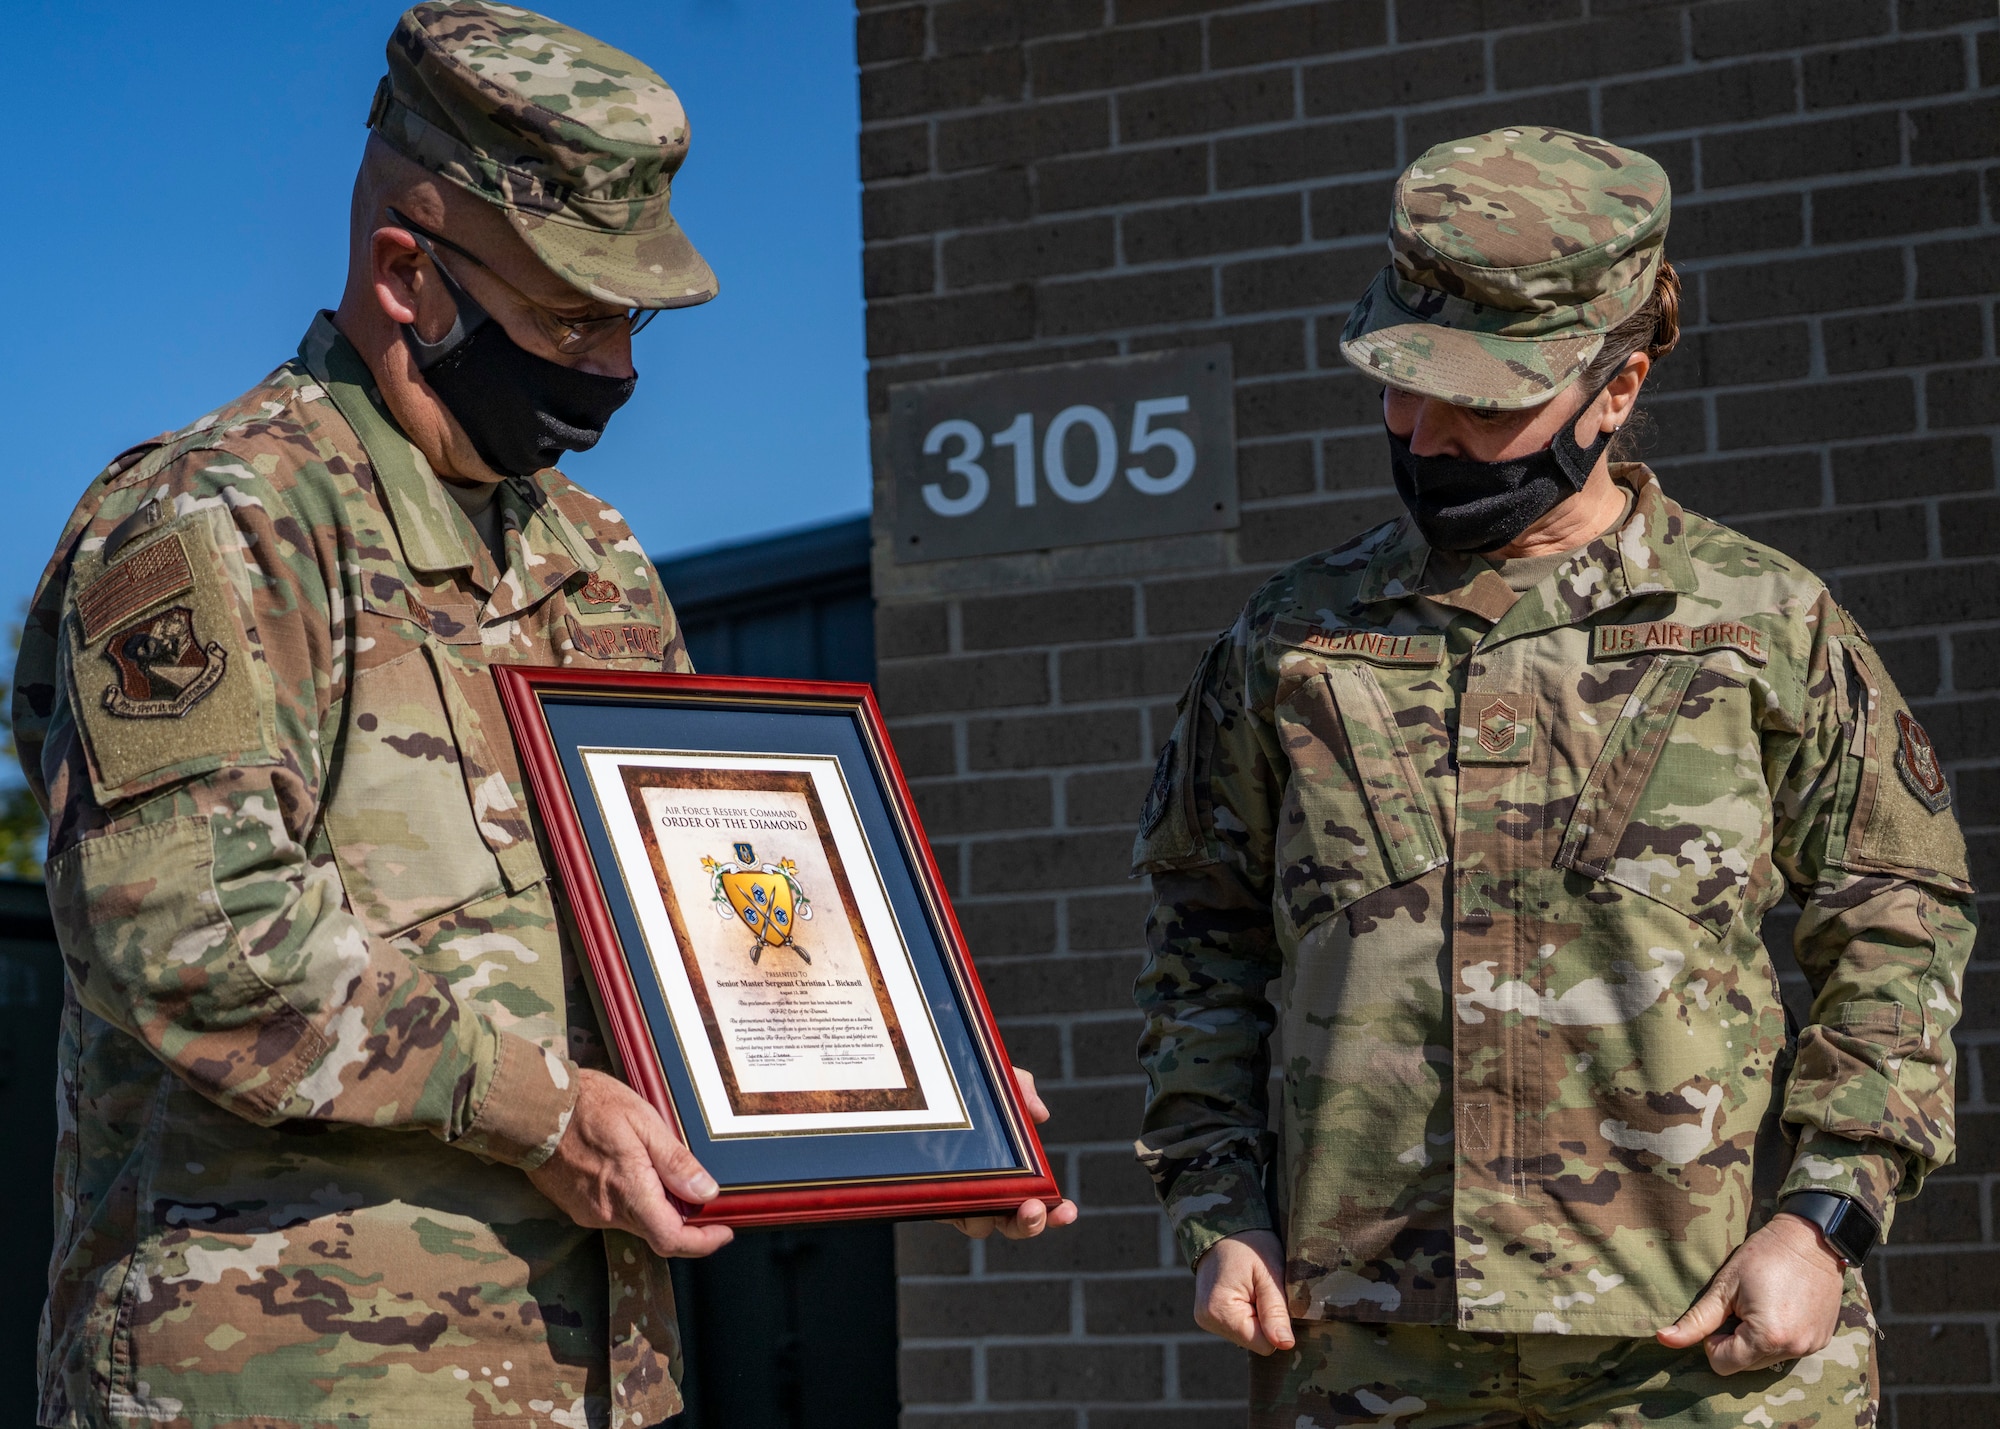 Photo of an Airman handing another Airman and award